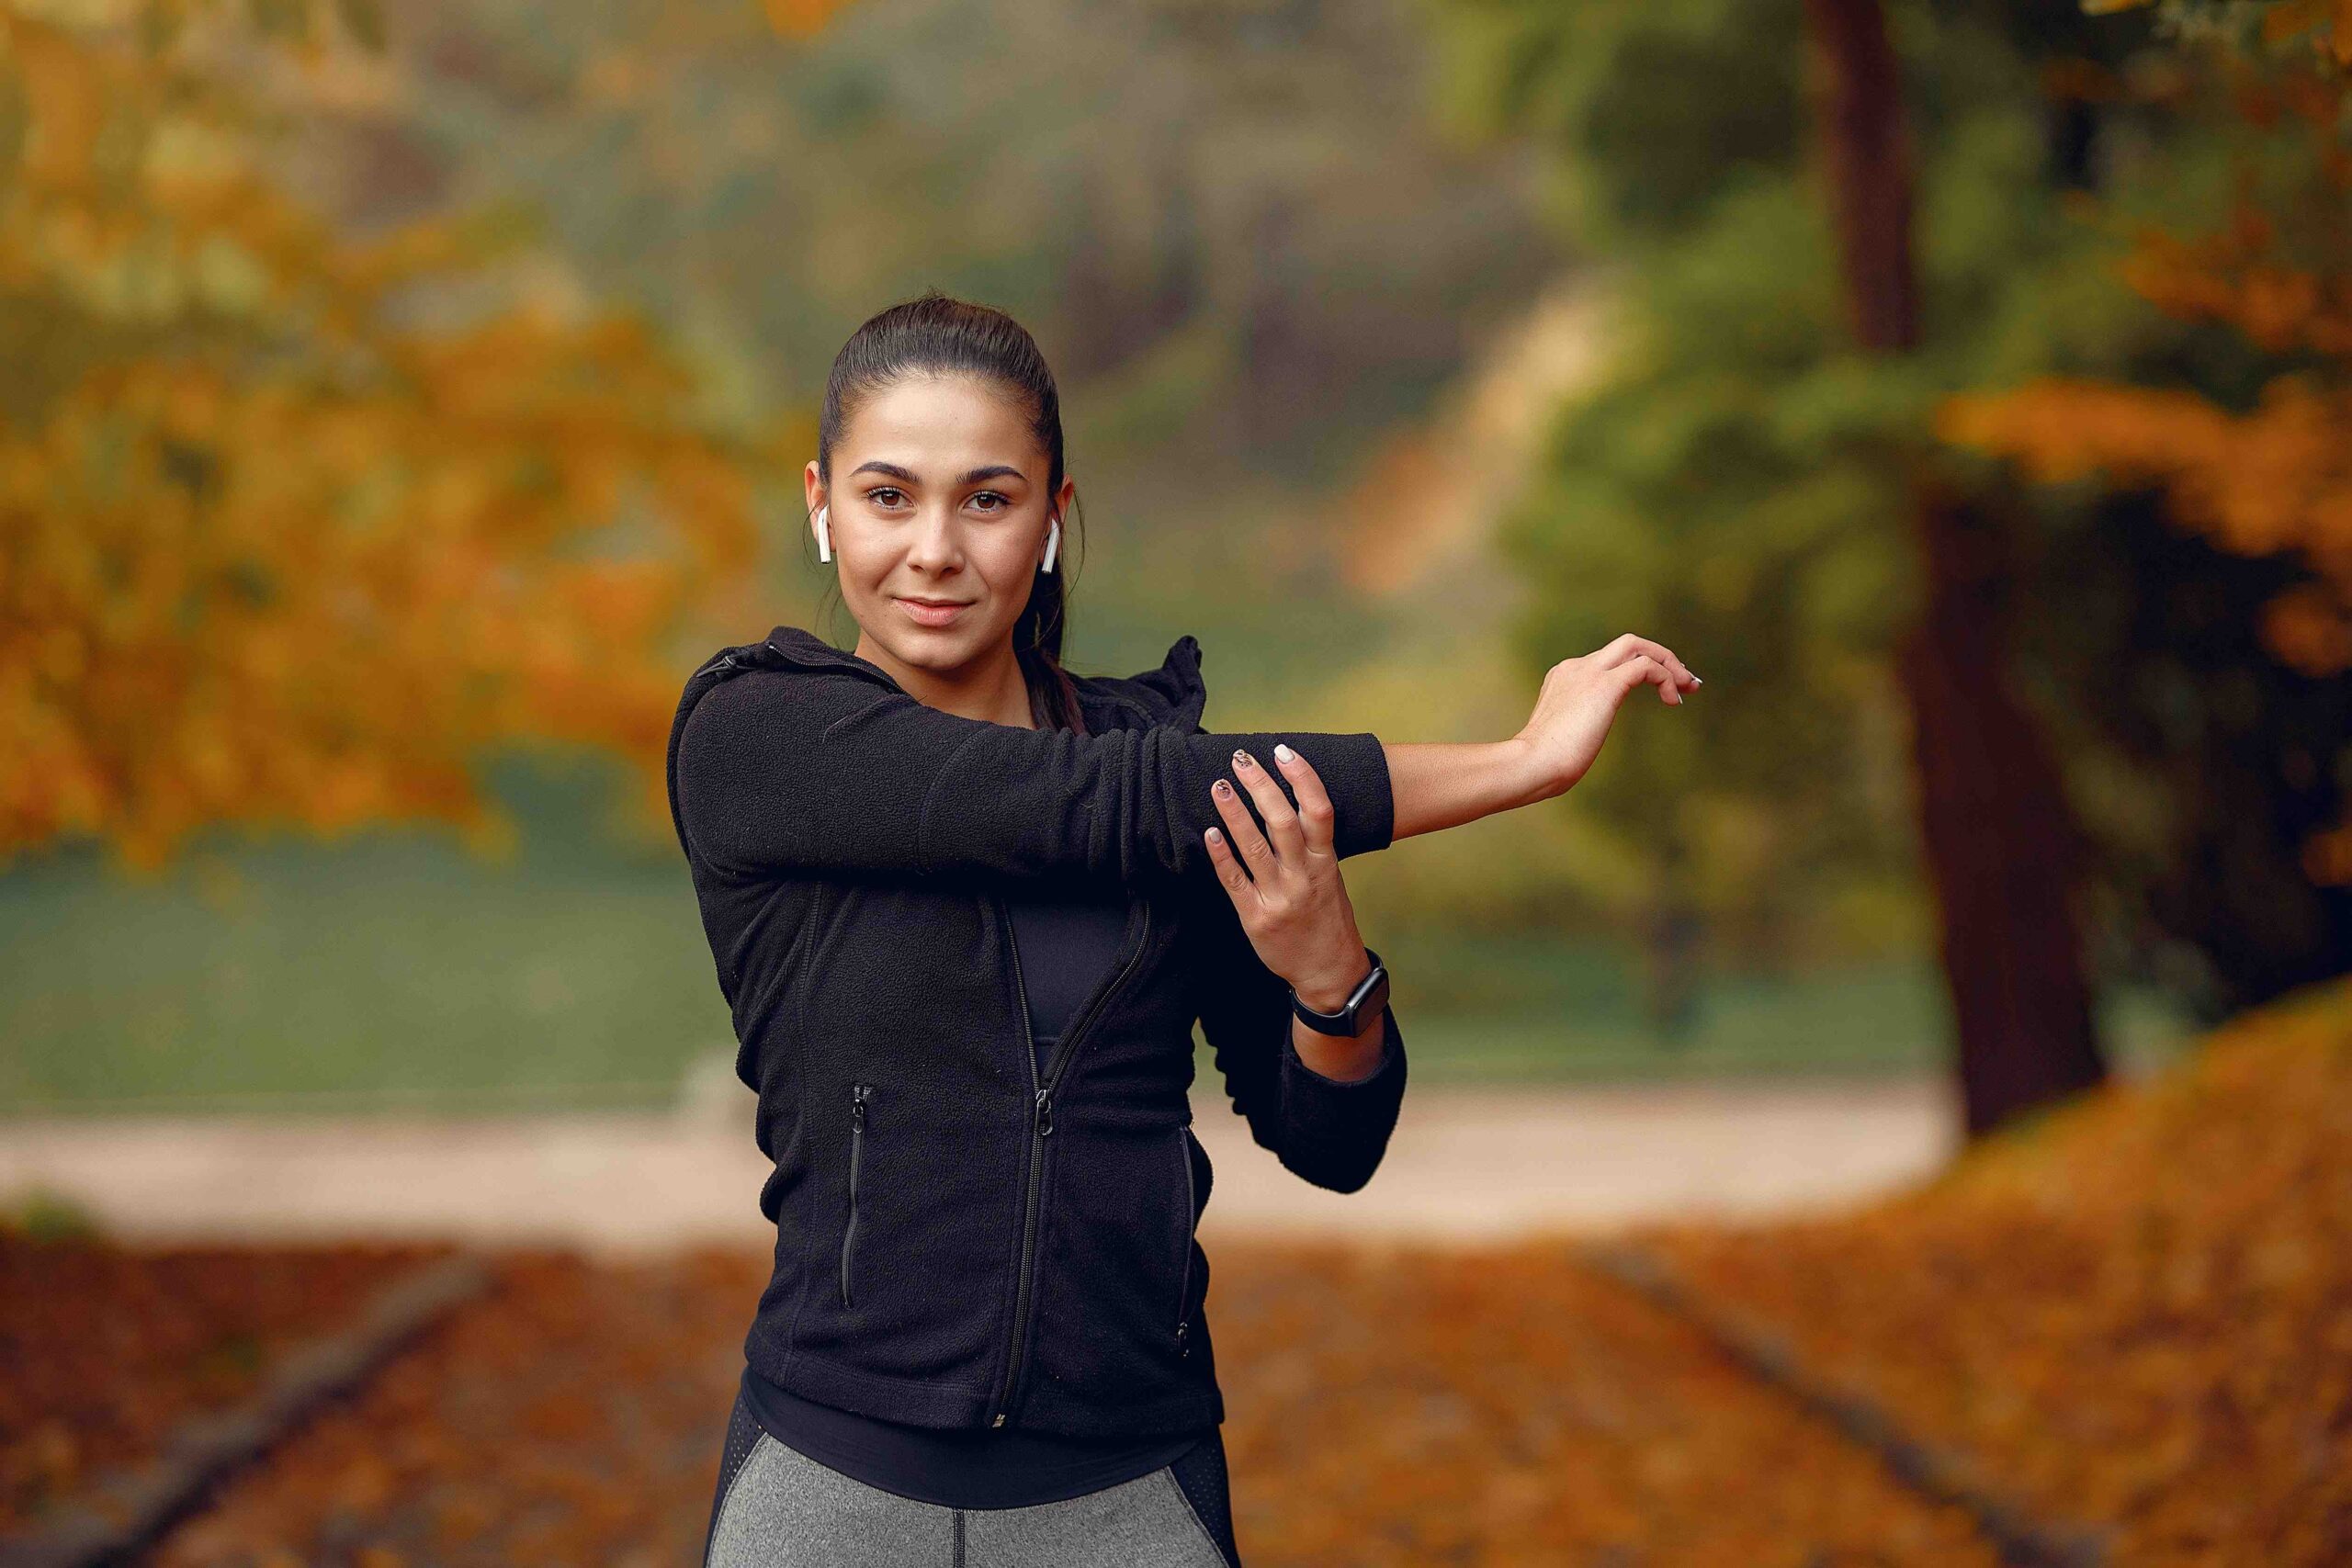 Weight Loss Journey. A girl wearing sports wear black top and gray leggings in the park amongst autumn trees